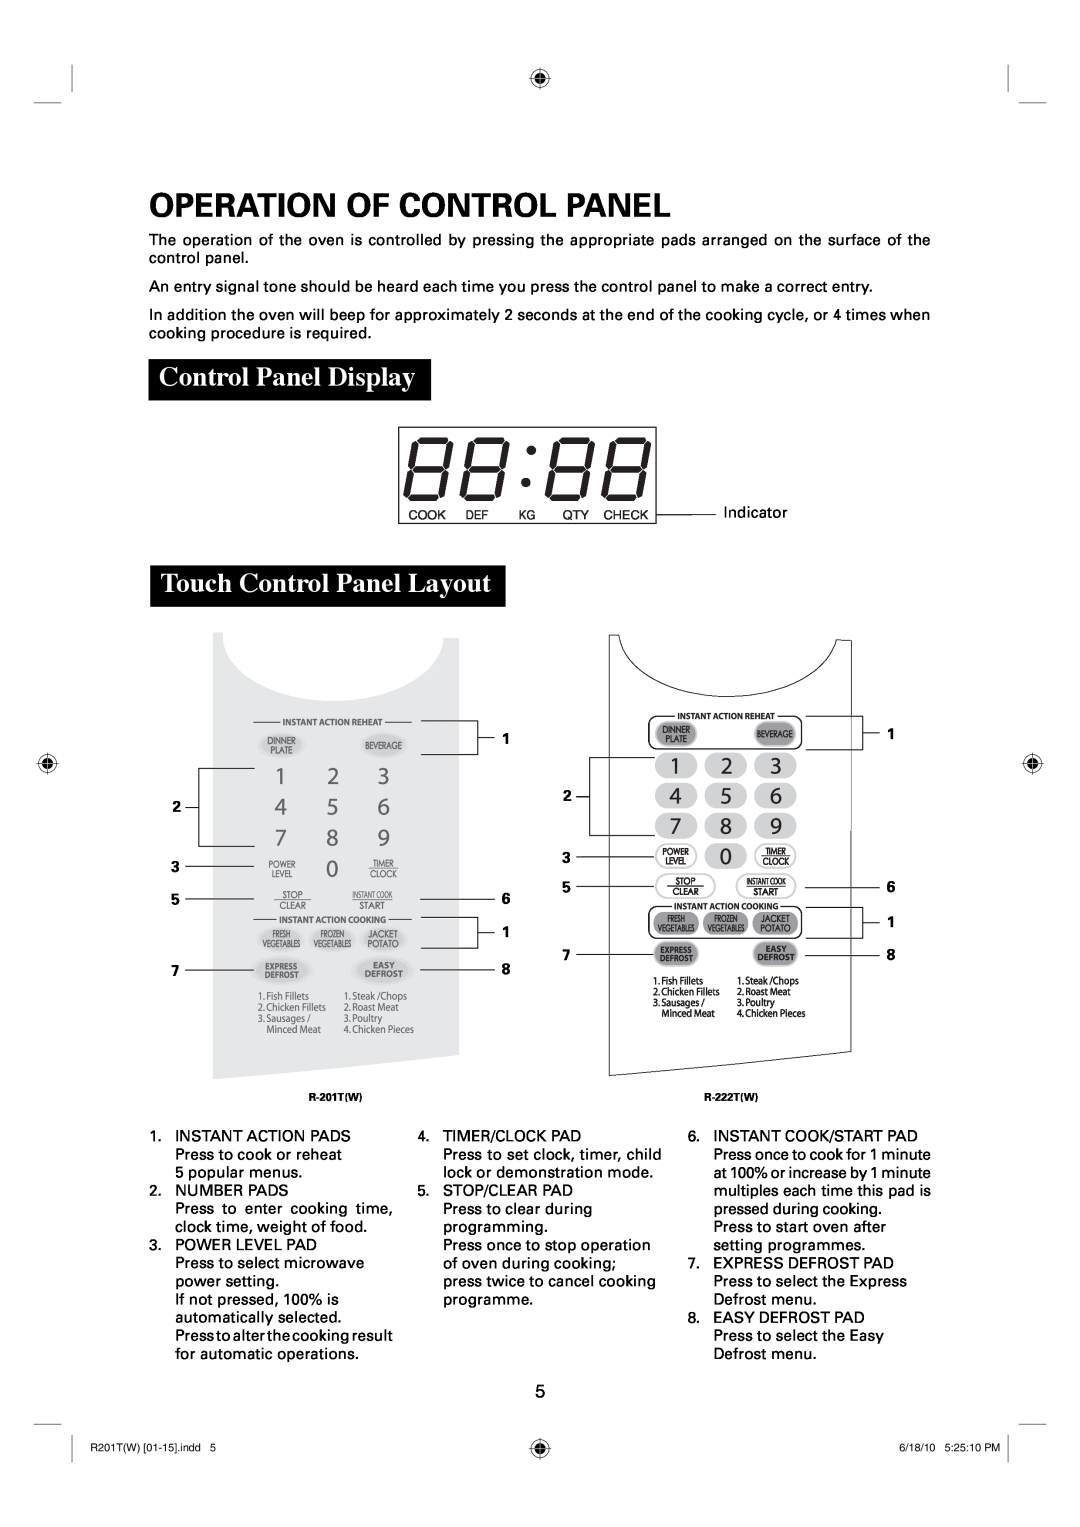 Sharp R-201T(W), R-222T(W) operation manual Operation Of Control Panel, Control Panel Display, Touch Control Panel Layout 